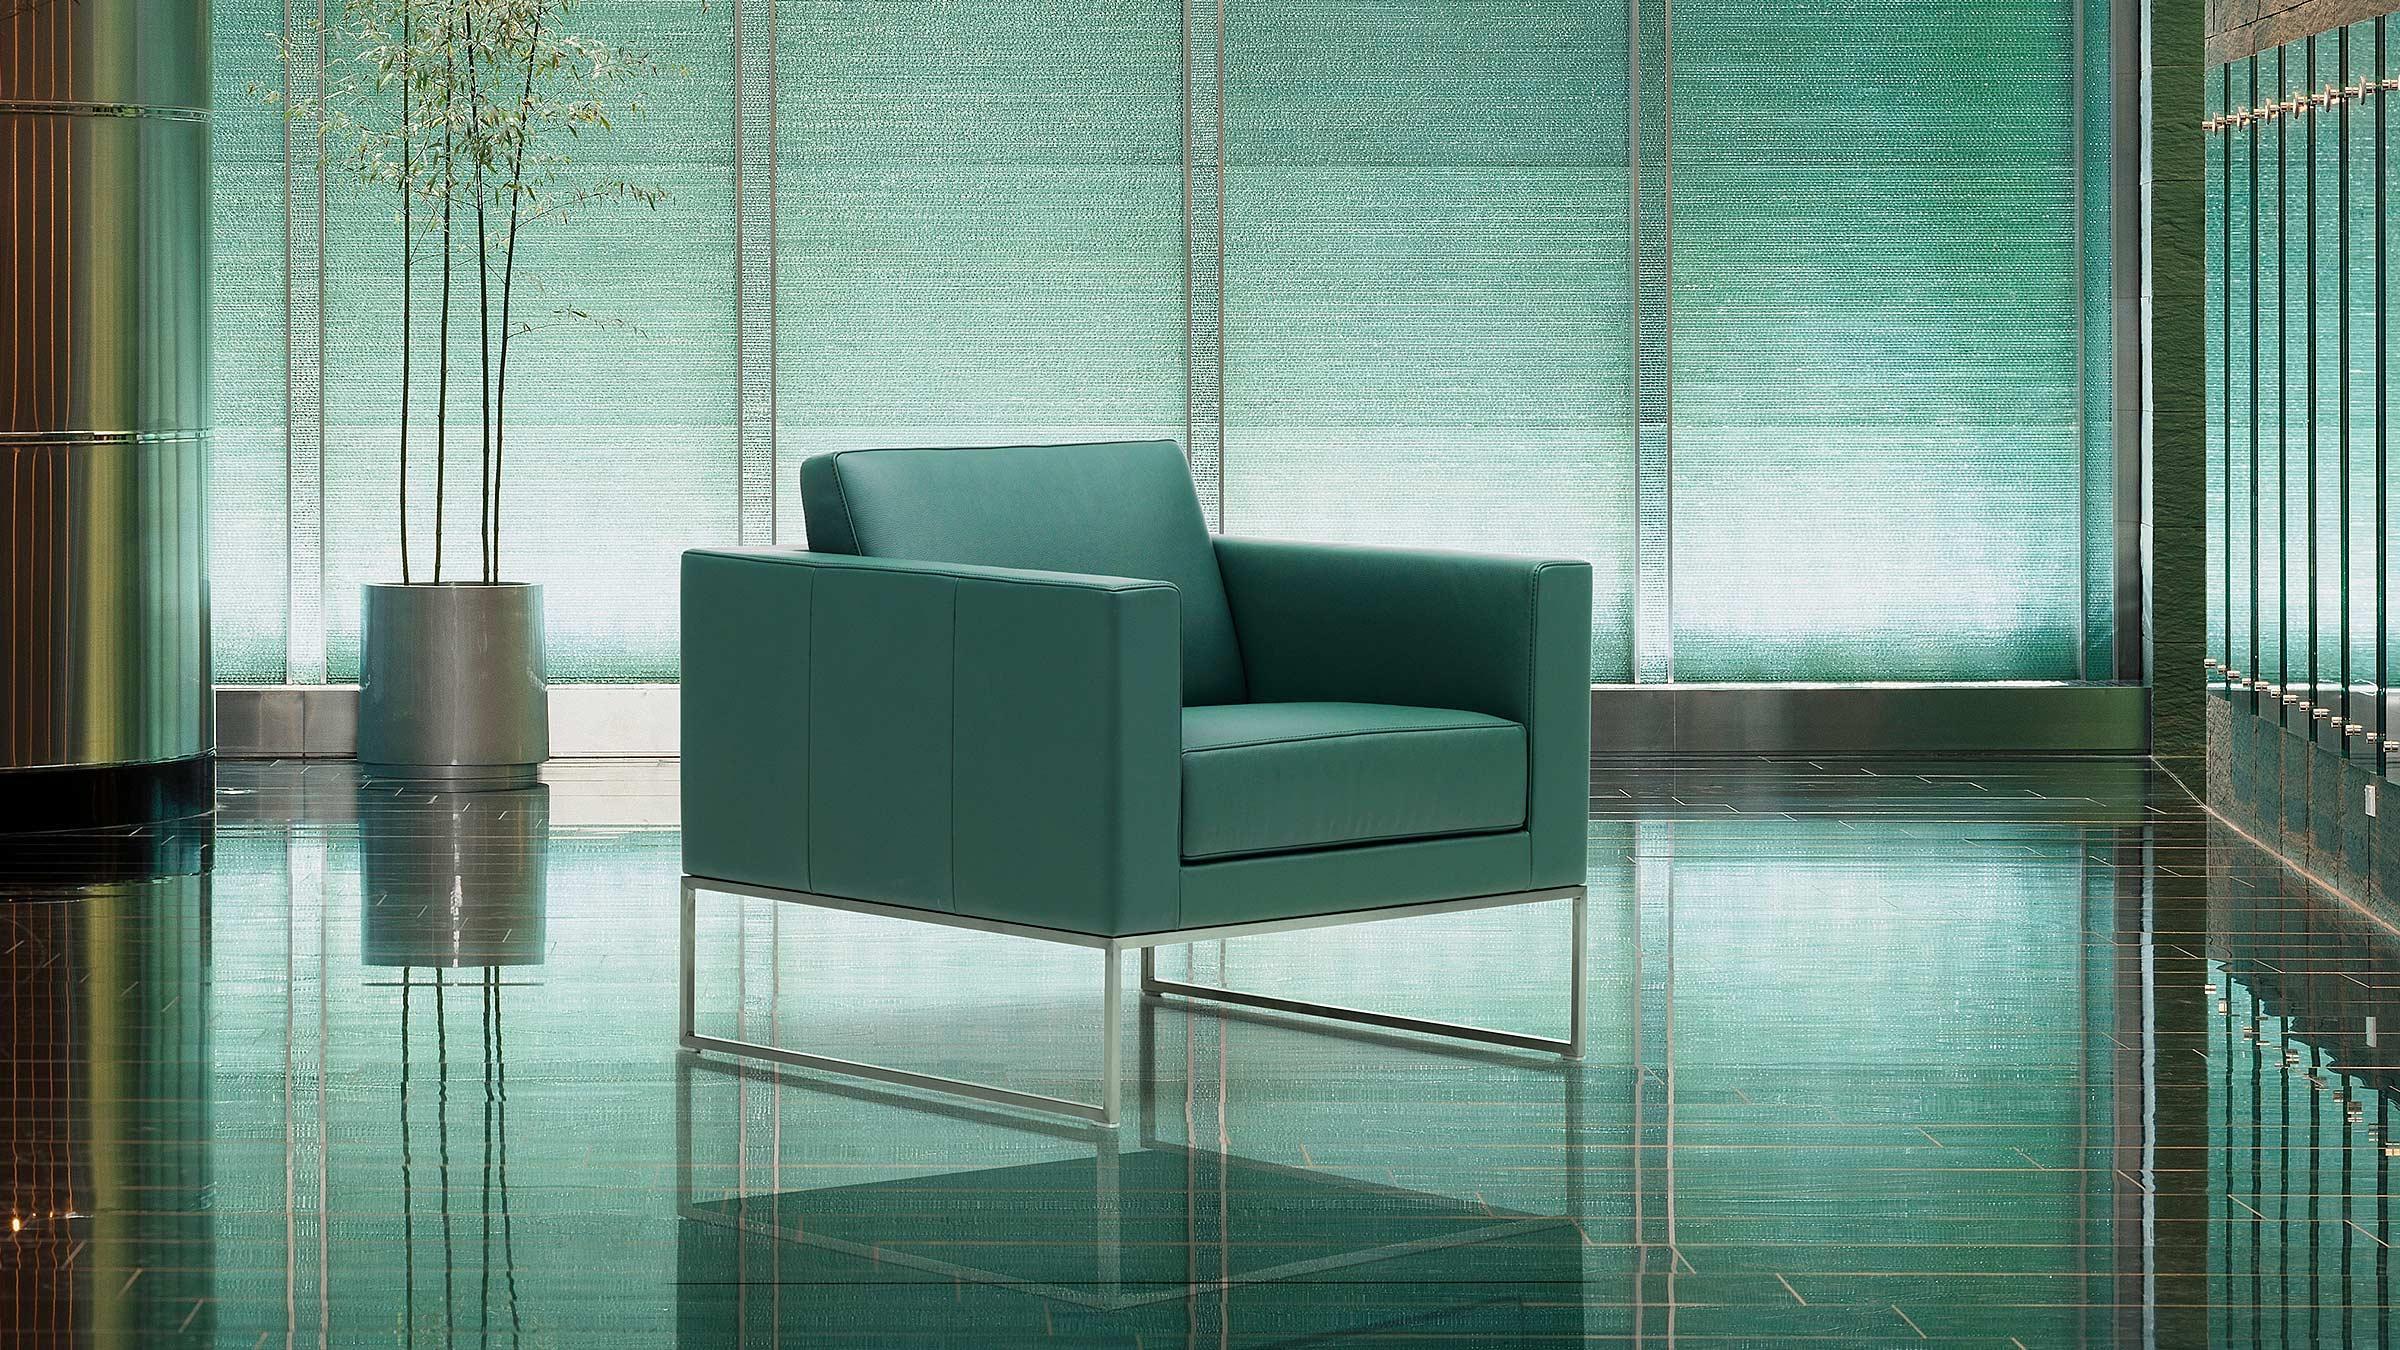 Five individual elements, each measuring 80 x 80 cm, form the basis of the seating landscape: various varia tions of armchairs with or without armrests as well as in termediate elements and hanging tables form the overall body of the DS-160 family.